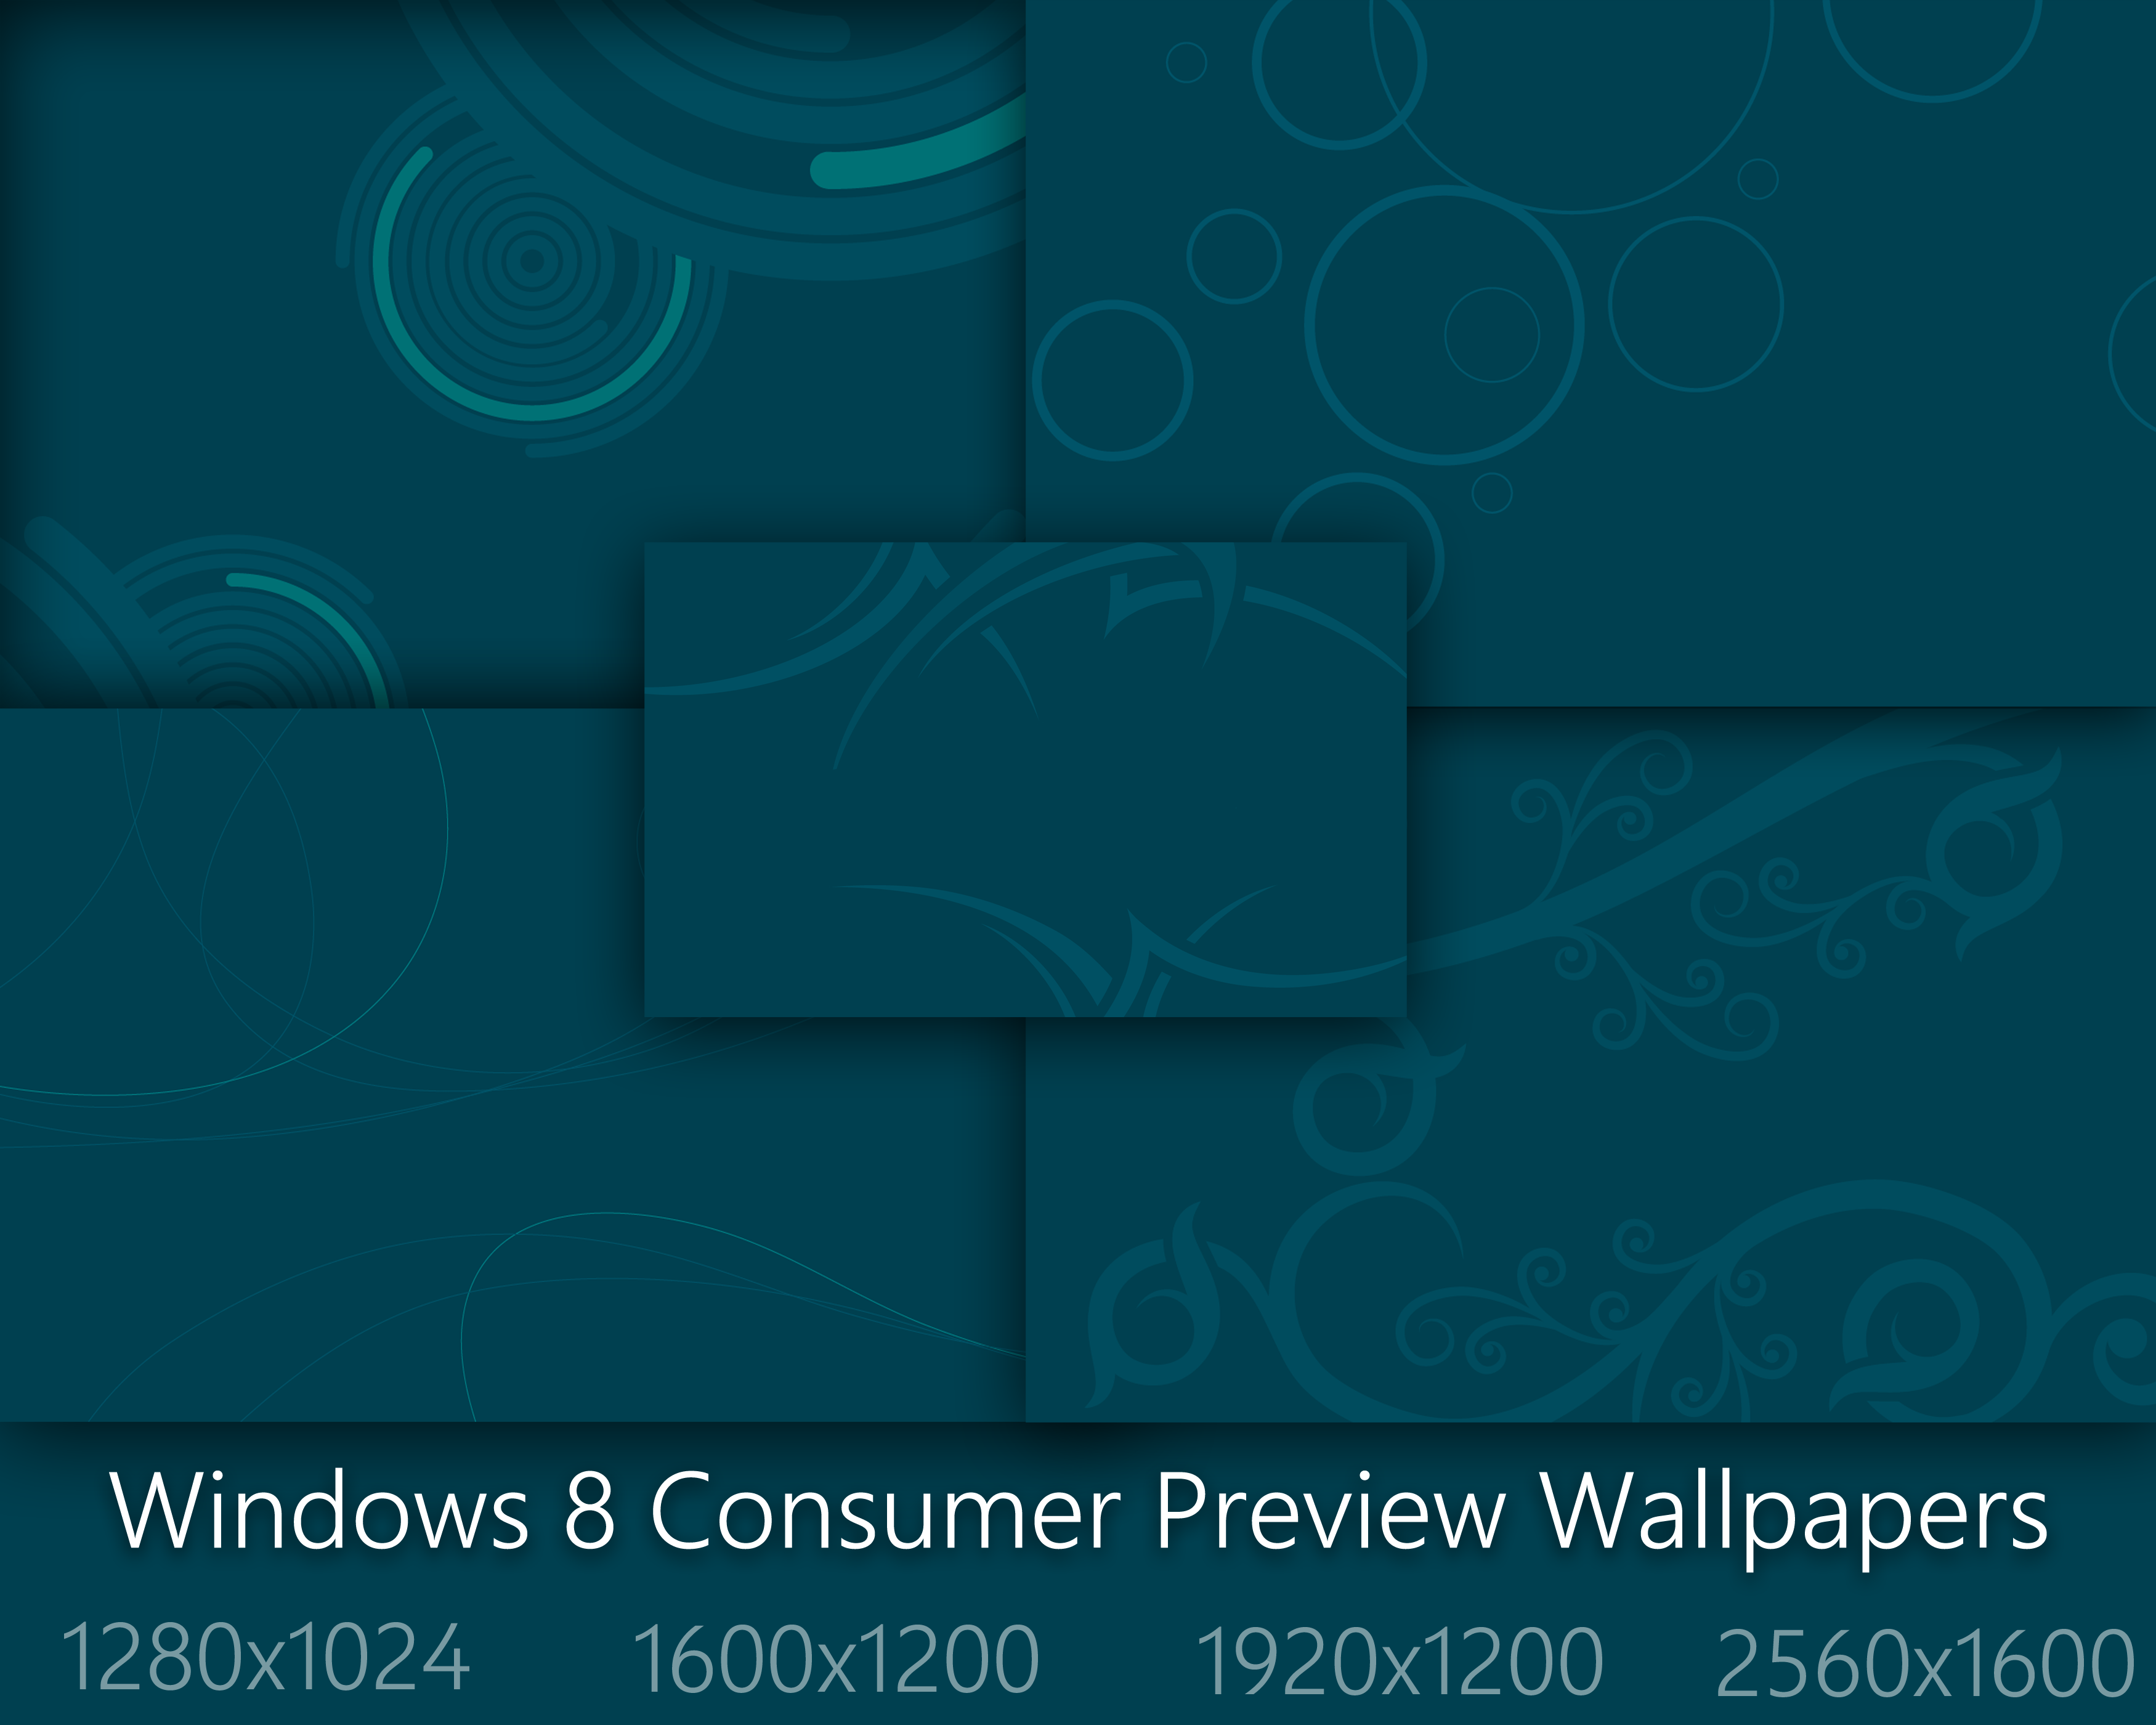 Windows 8 Consumer Preview Start Blue Wallpapers by Brebenel Silviu on 3500x2800